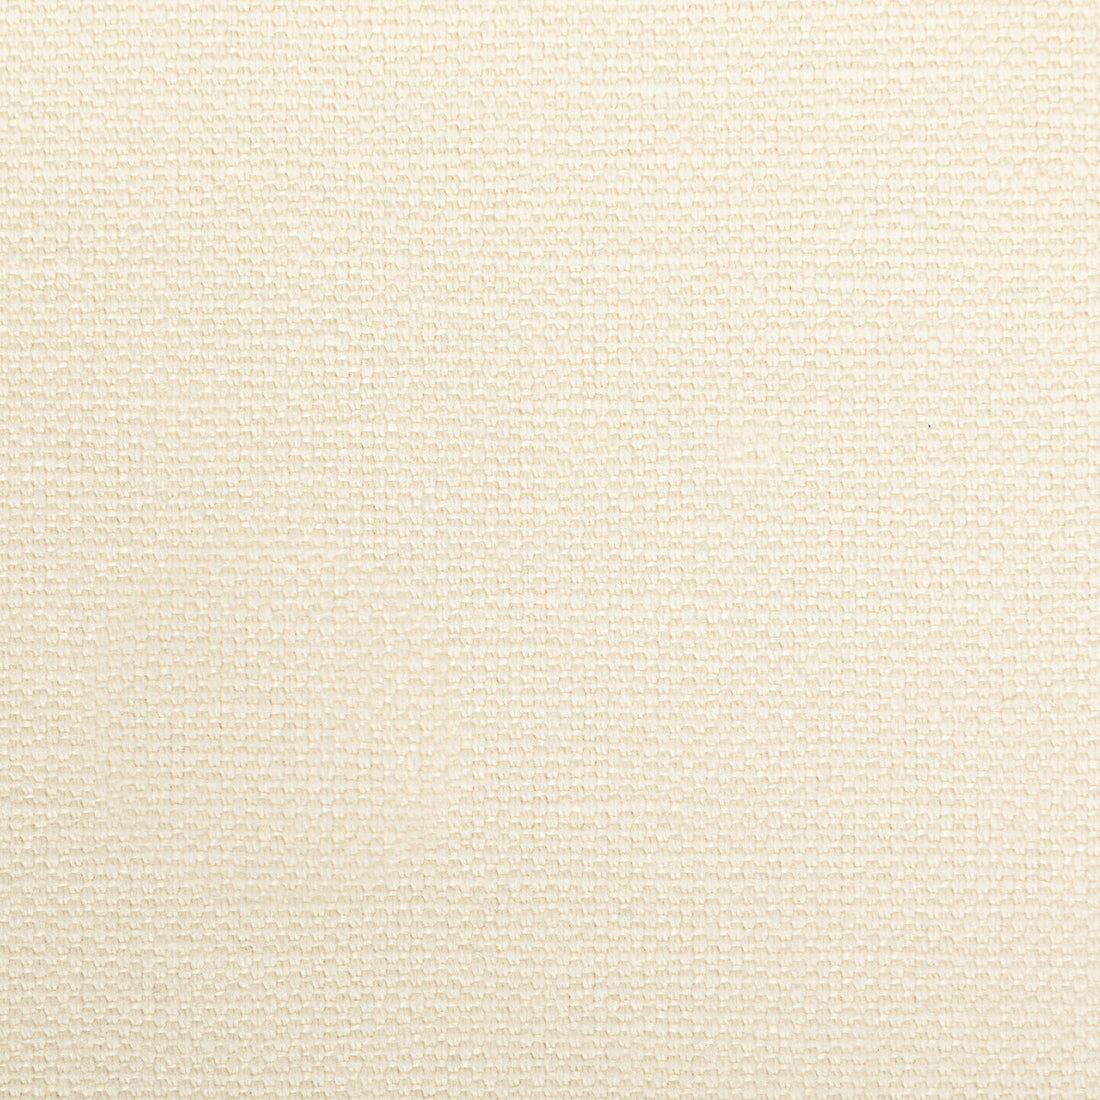 Carson fabric in ivory color - pattern 36282.1.0 - by Kravet Basics